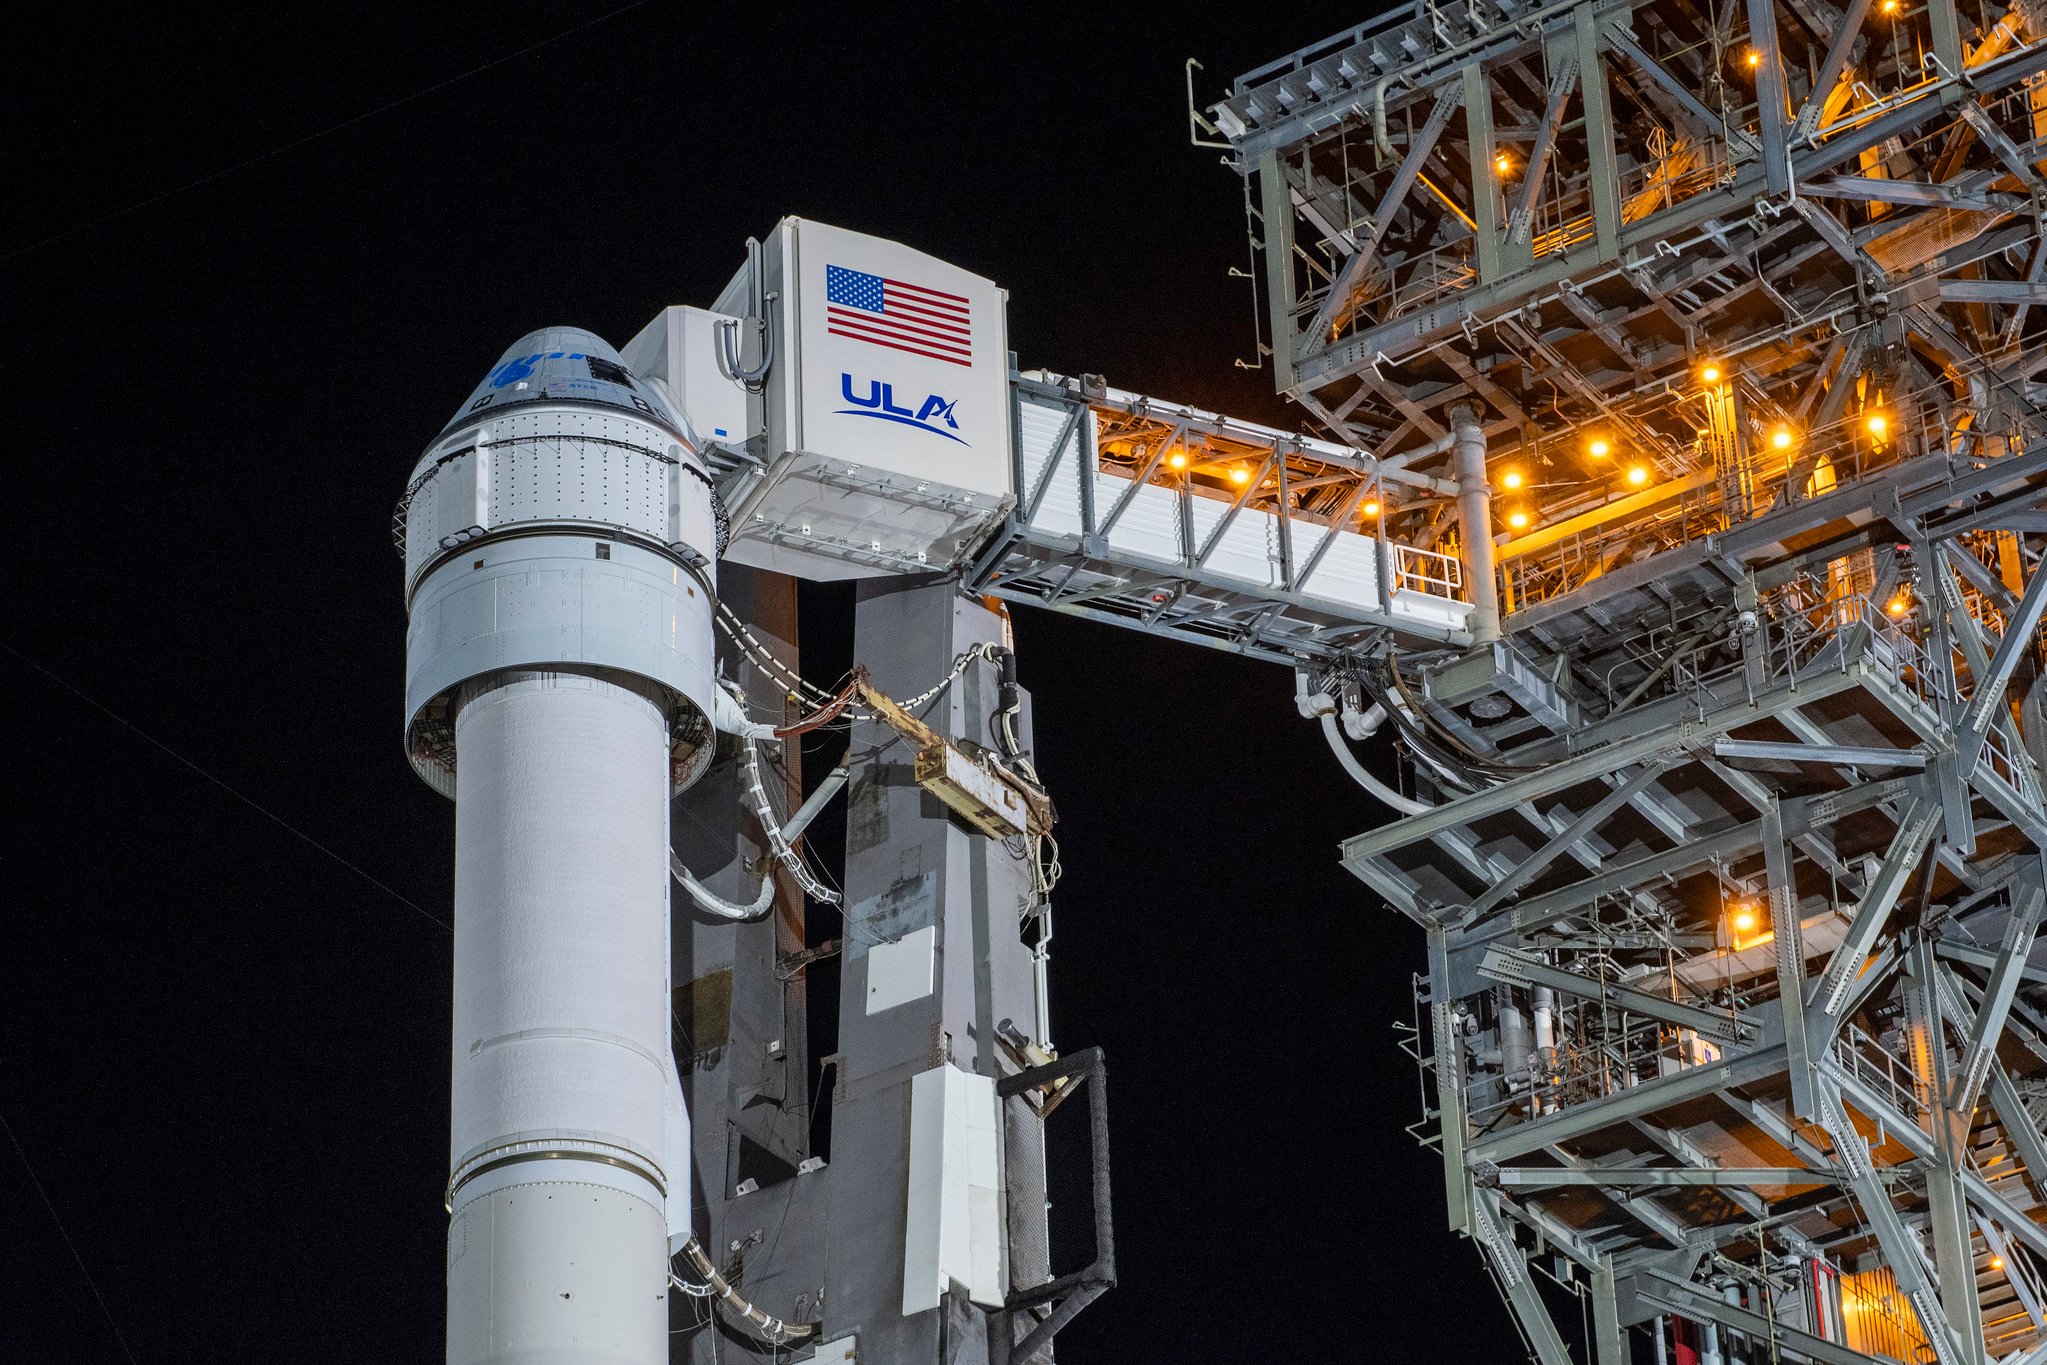 The Crew Access Arm enables the astronauts to board the spacecraft. Photo by United Launch Alliance